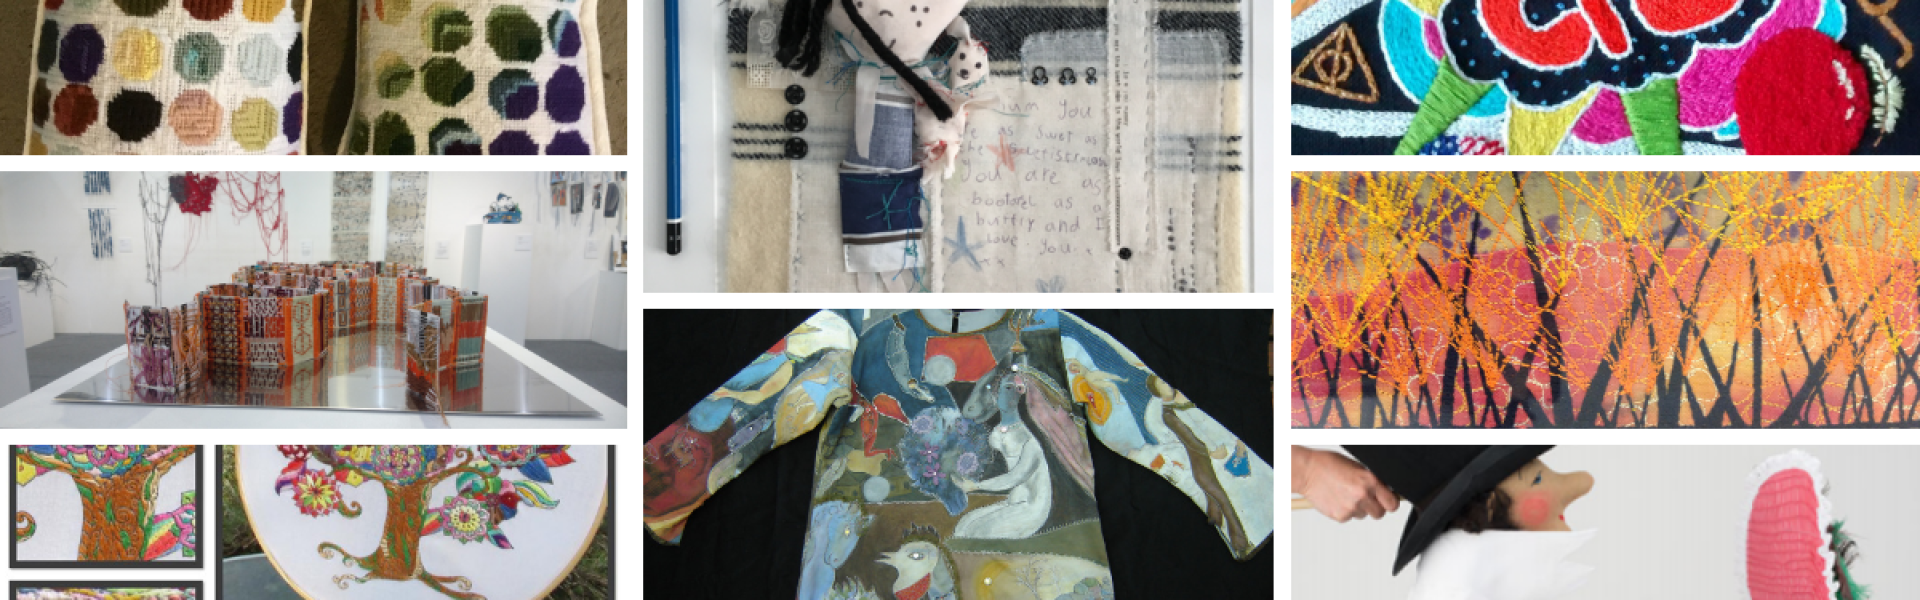 Finalists of the October 2018 Creative Bursary Scheme at School of Stitched Textiles